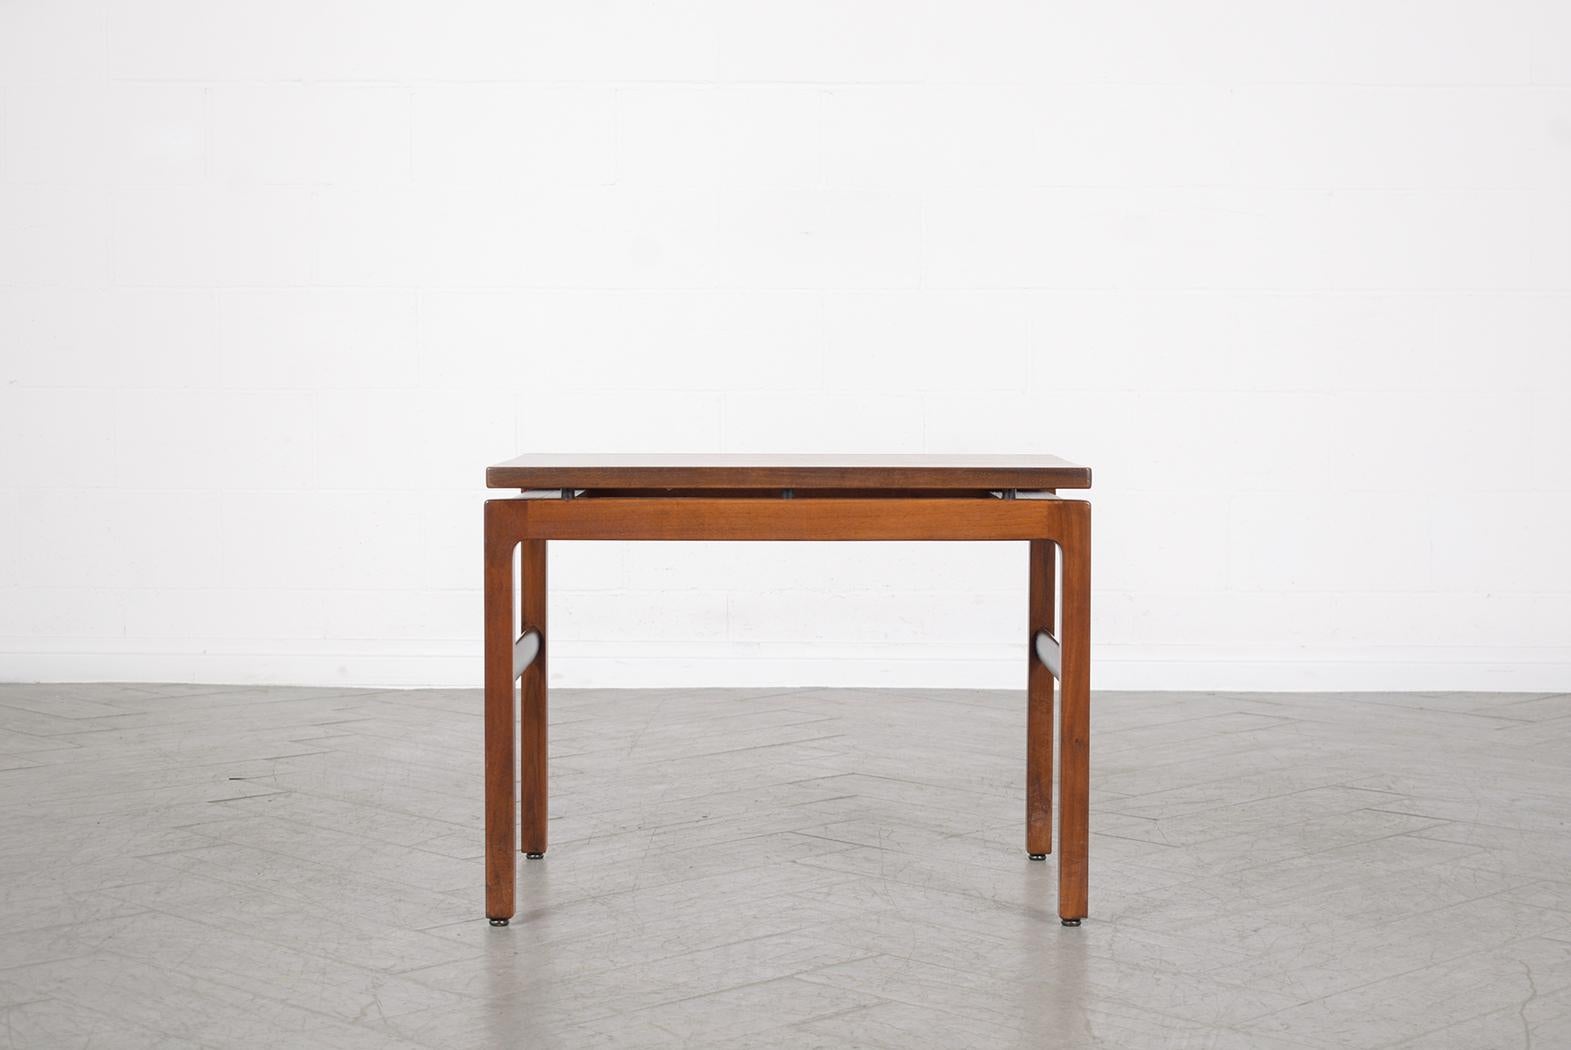 American 1960s Mid-Century Modern Walnut Side Table: Restored with Ebonized Accents For Sale